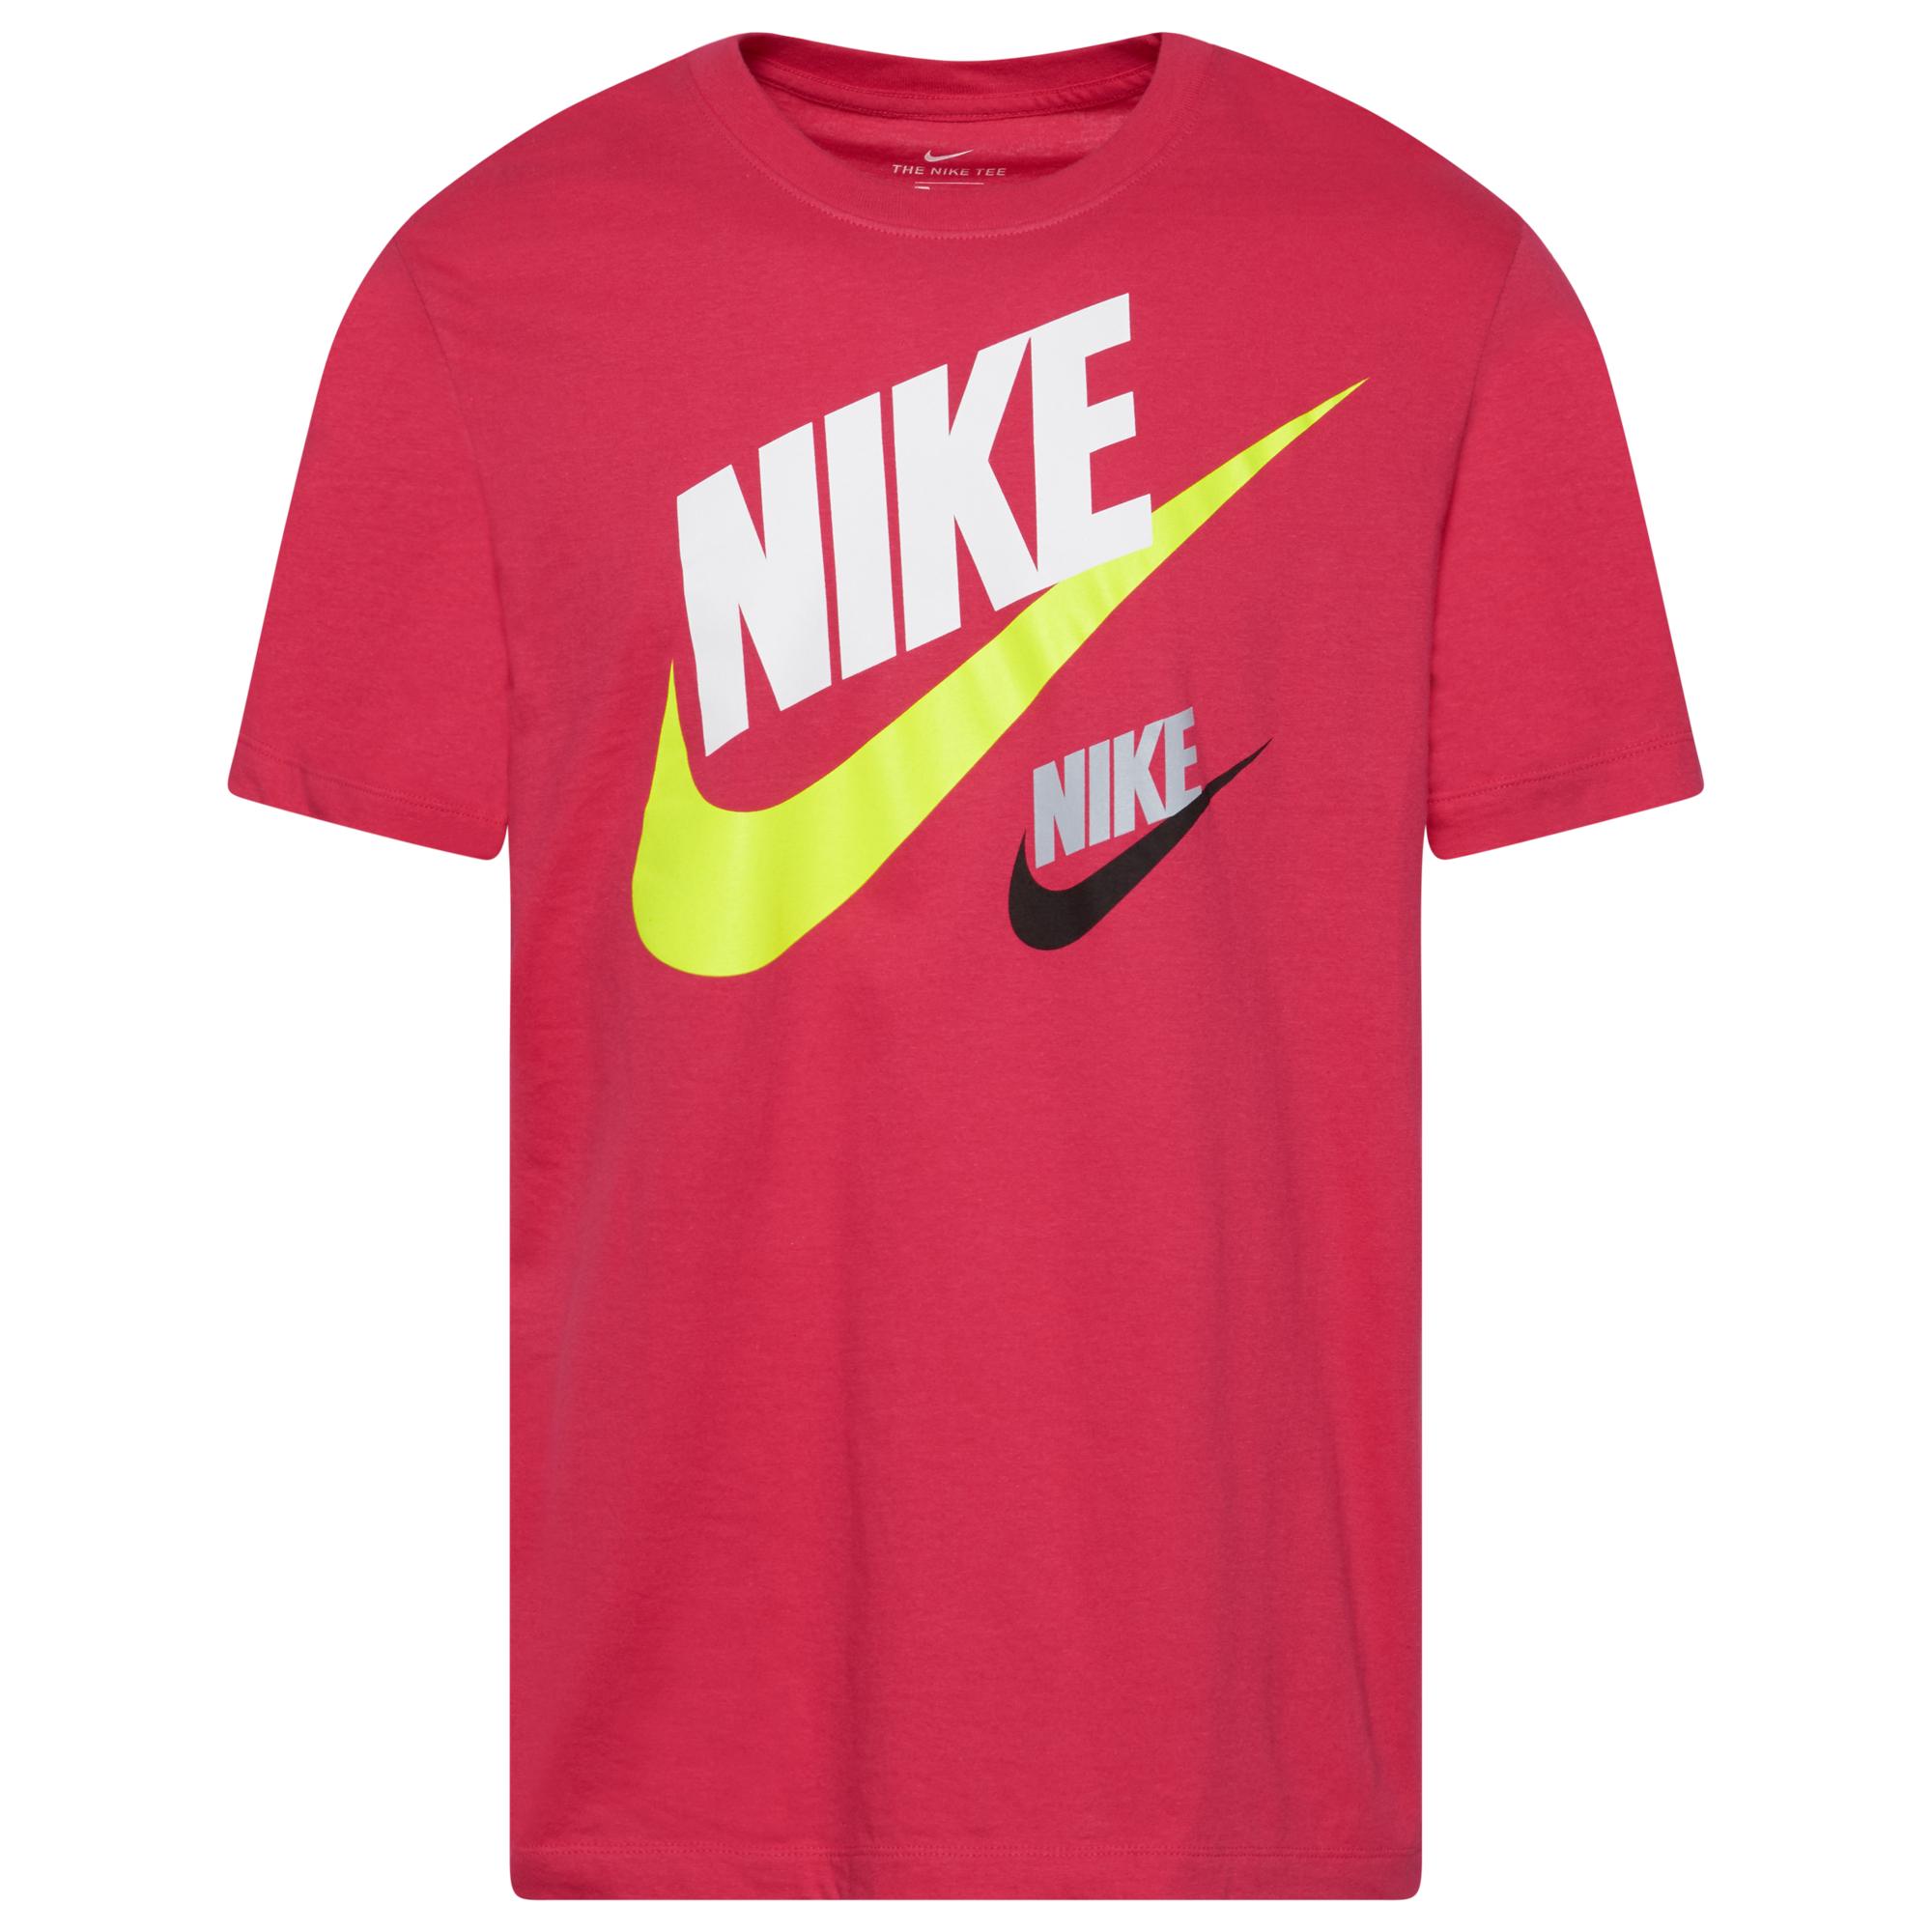 Nike 2 Futura T-shirt in Pink for Men - Lyst